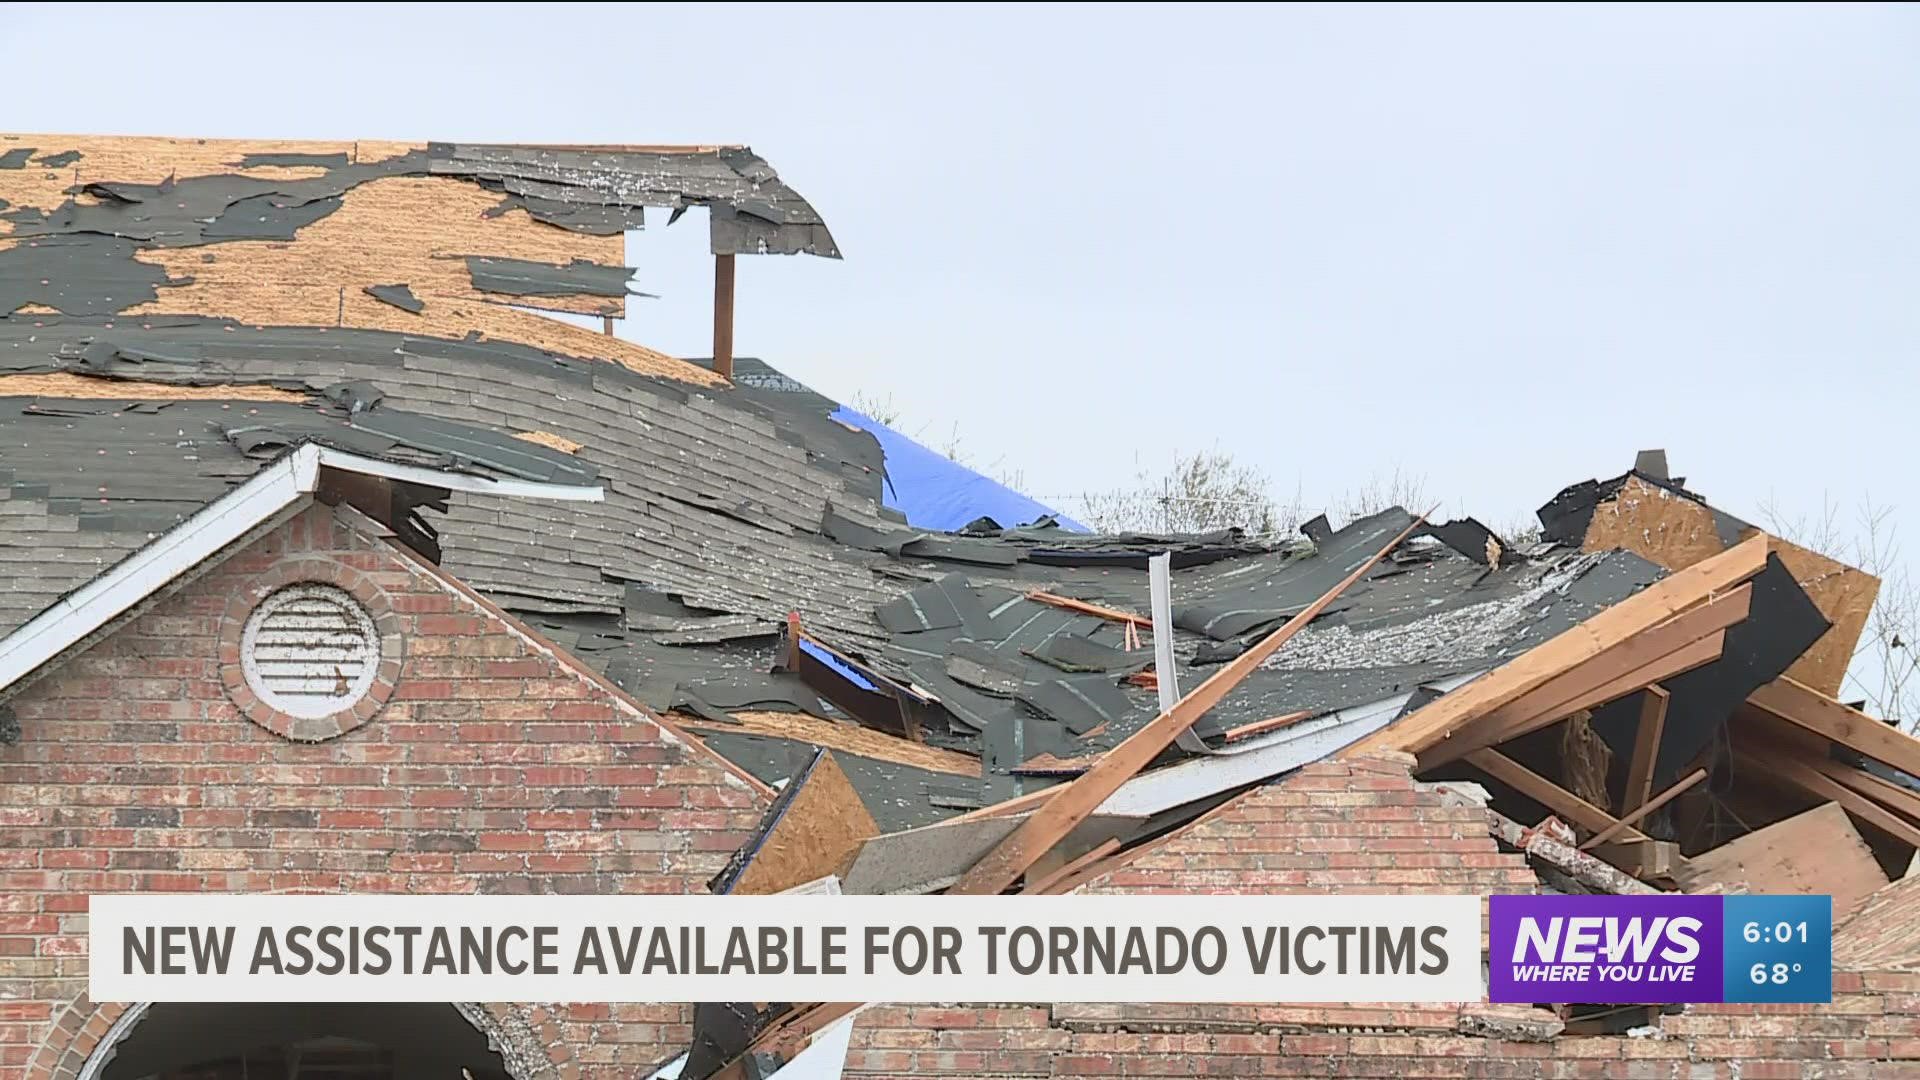 Those impacted by severe storms and tornadoes on March 30 can now apply for disaster assistance.